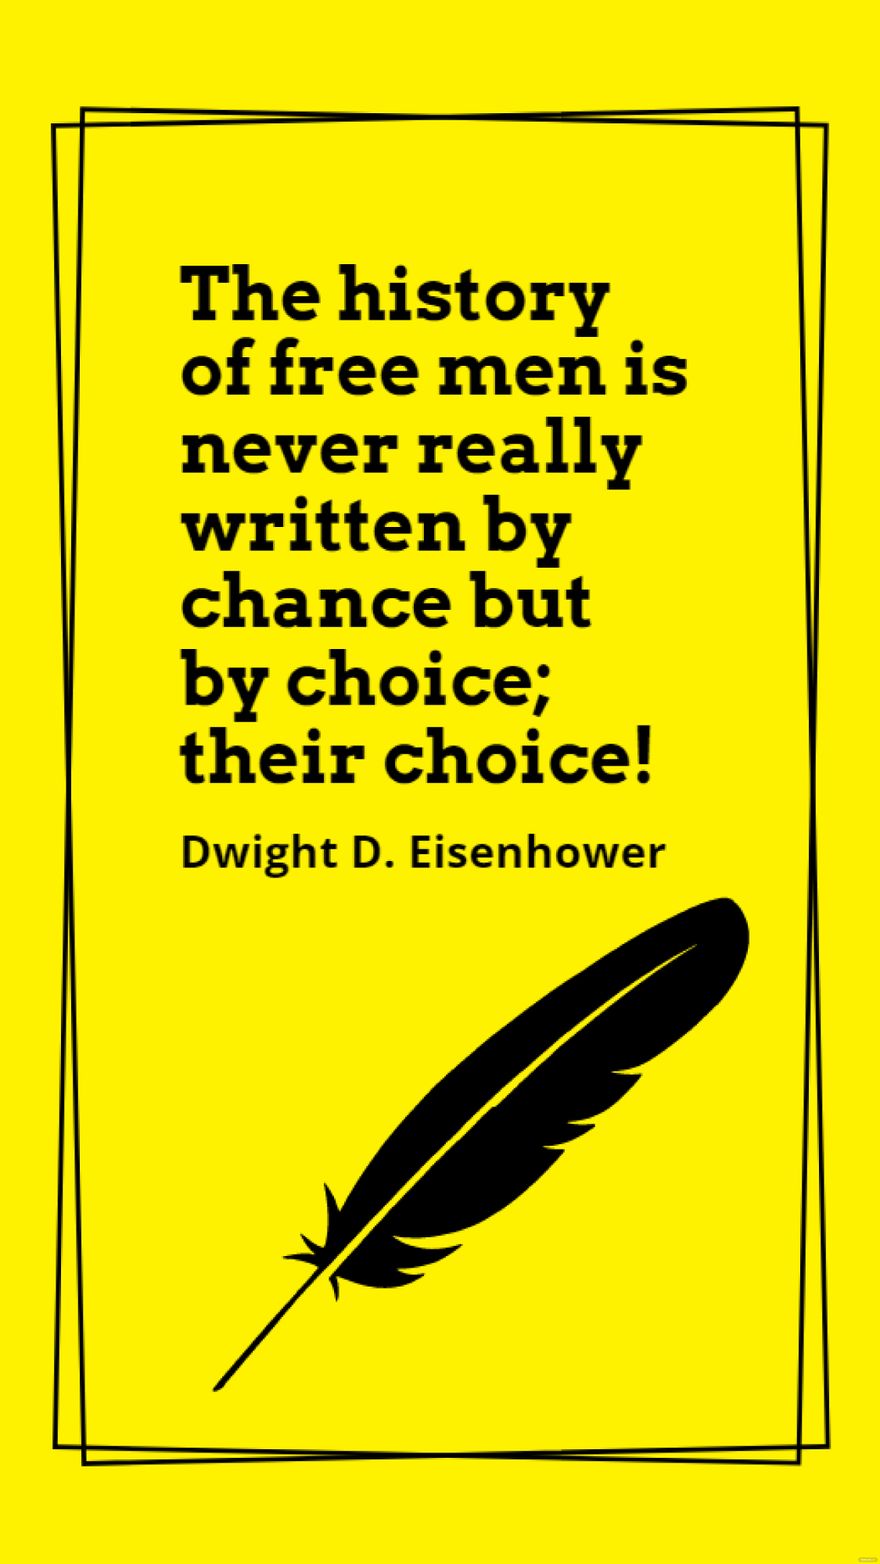 Dwight D. Eisenhower - The history of free men is never really written by chance but by choice; their choice!